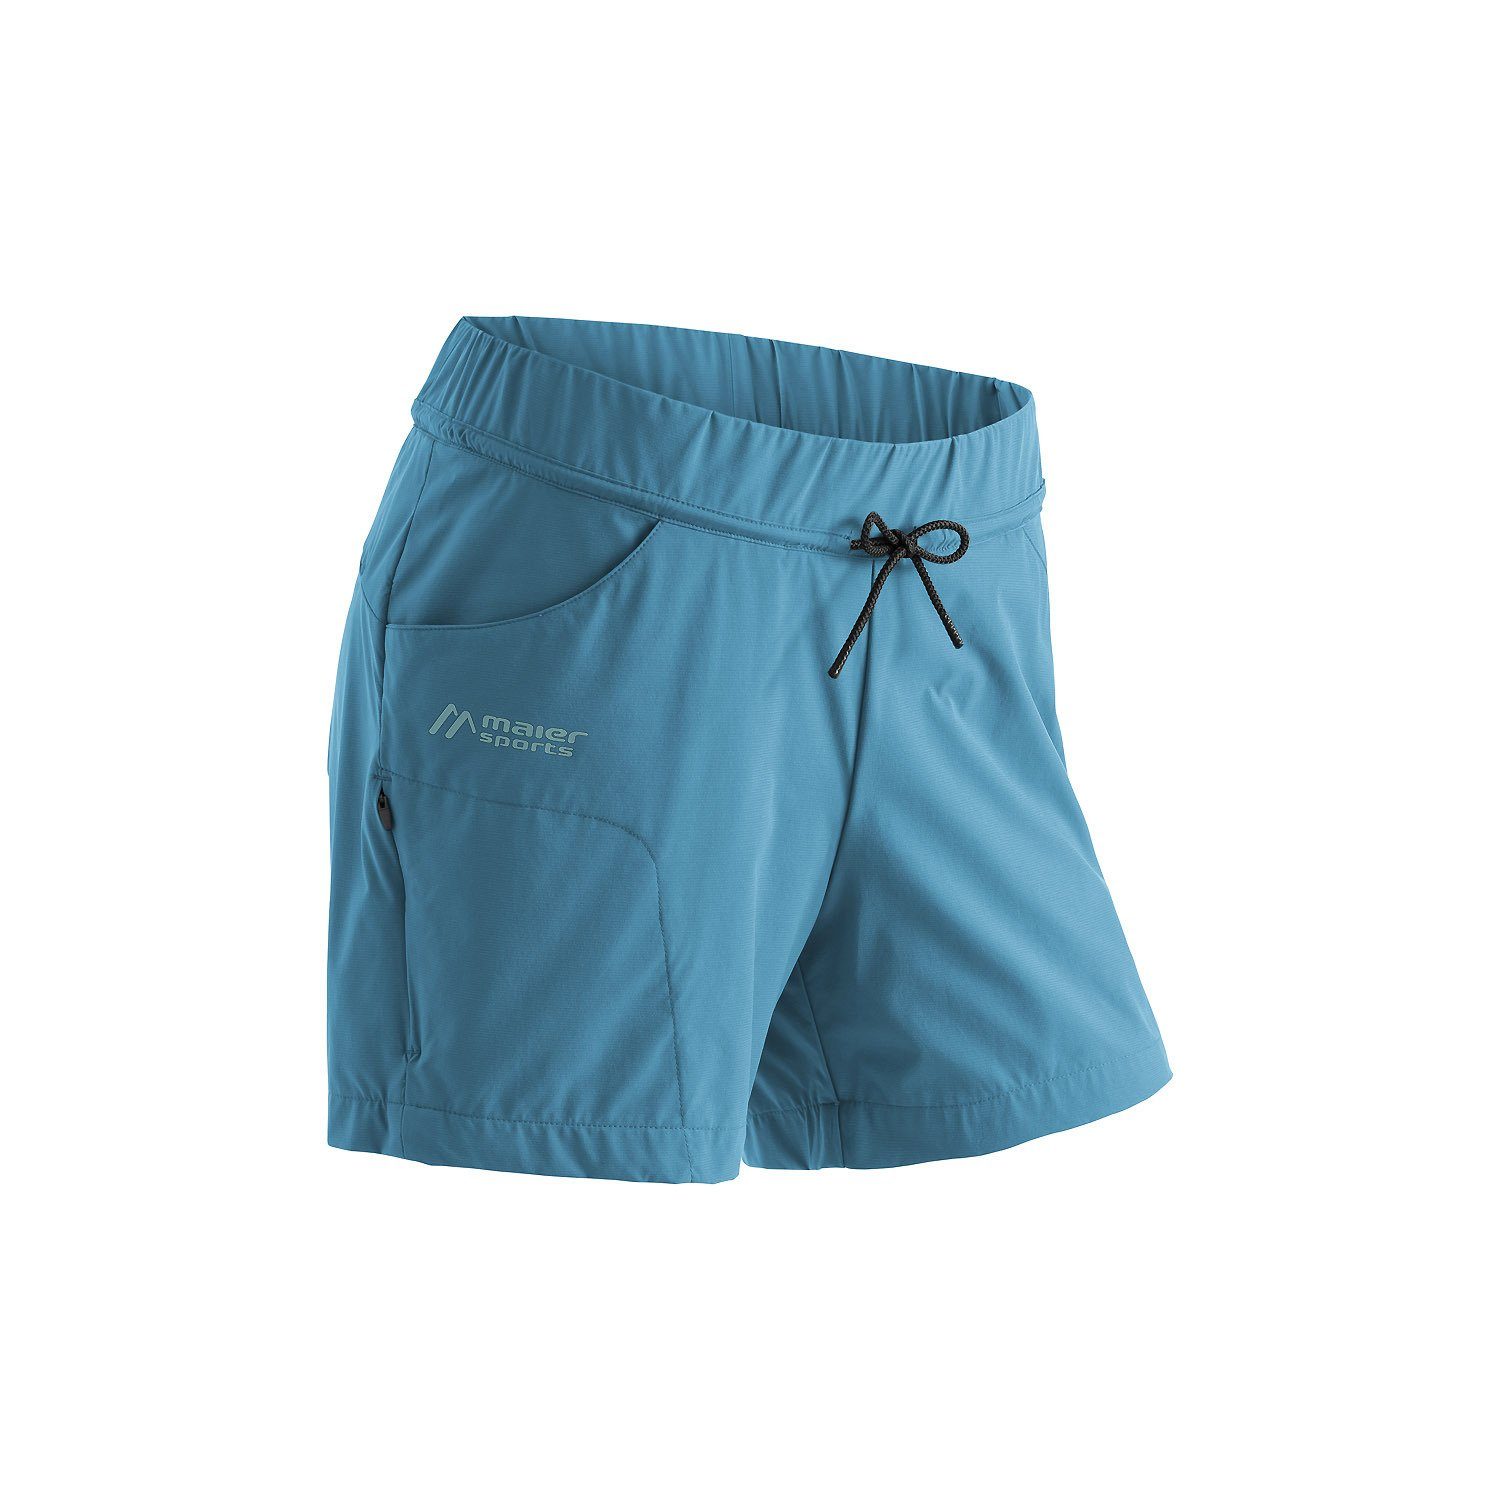 Maier Sports Funktionsshorts Shorts Fortunit Petrol